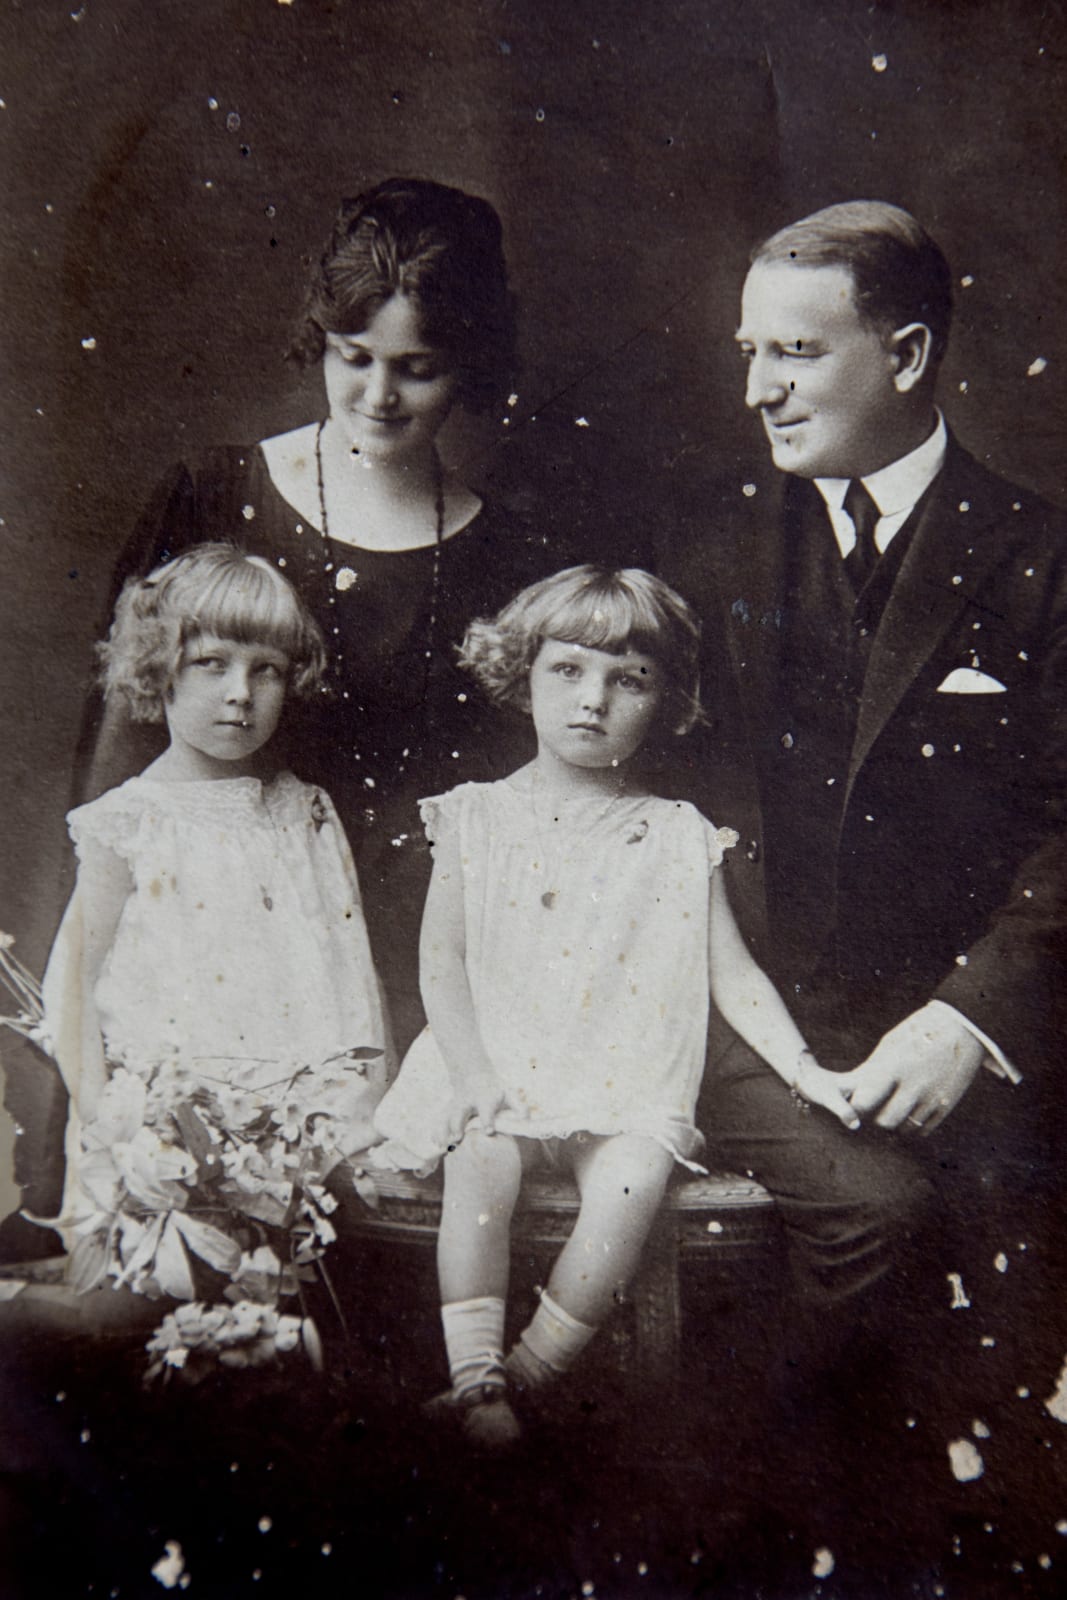 Ides Kihlen with her father Enrique Kihlen, mother Clelia Brunet, and sister Olga (Titi).